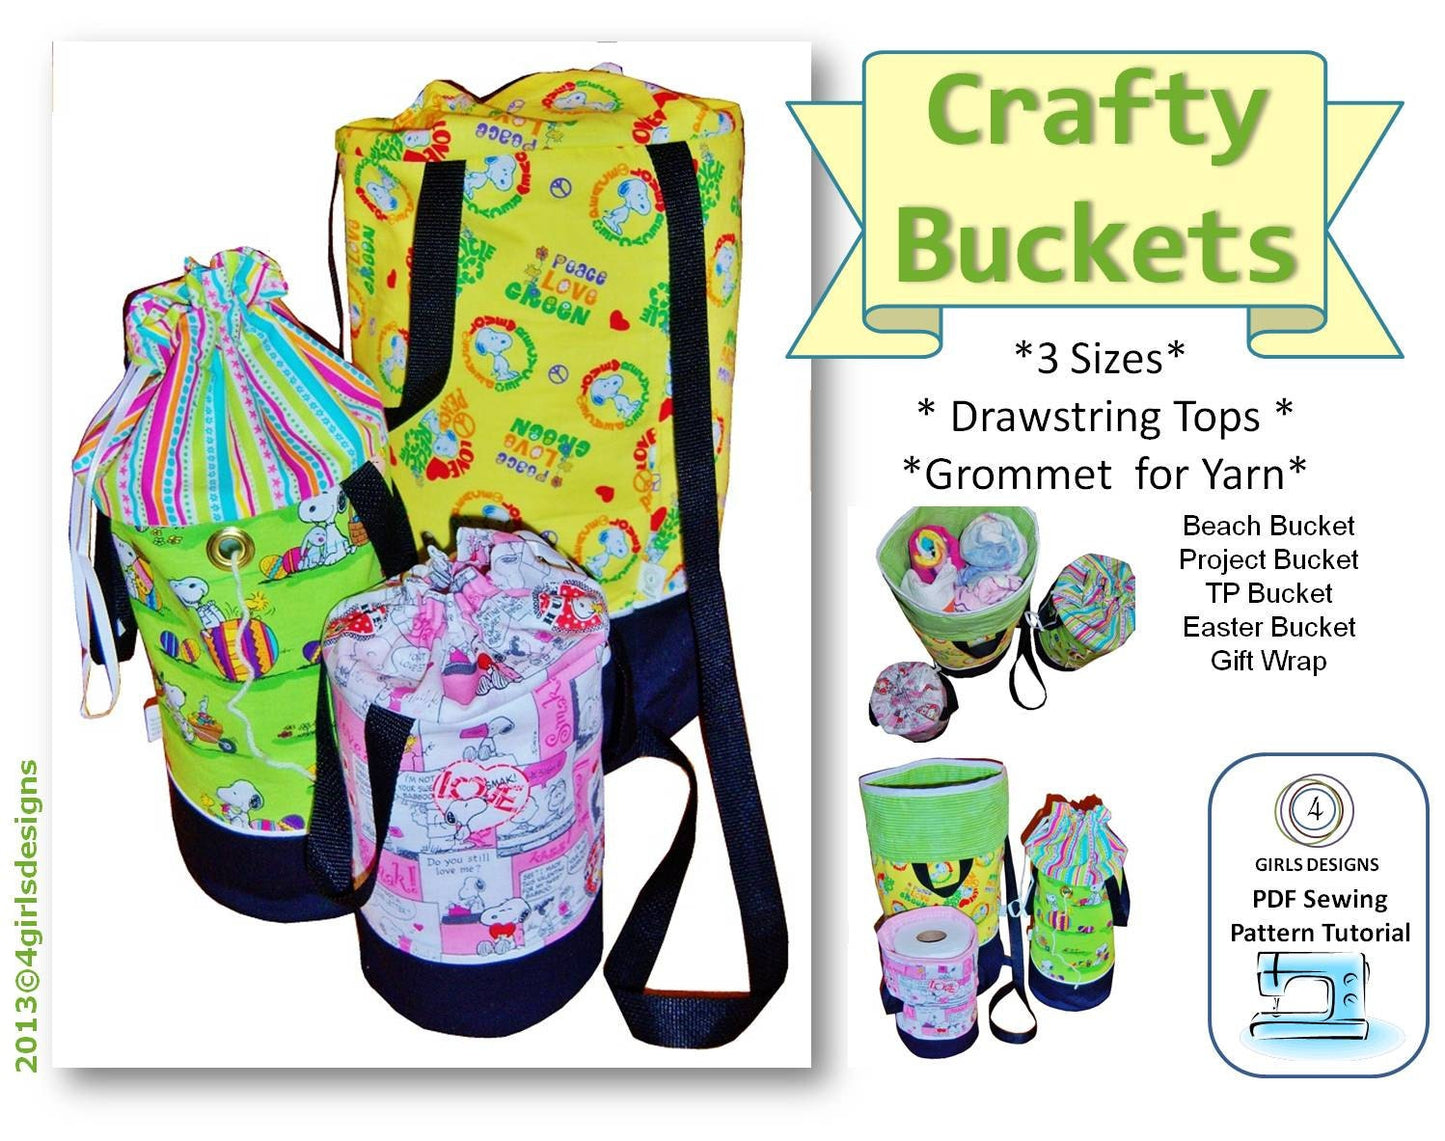 INSTANT DOWNLOAD PDF Sewing Pattern: Crafty Buckets in 3 Sizes for Organizing Crafts, Toys, You Name It